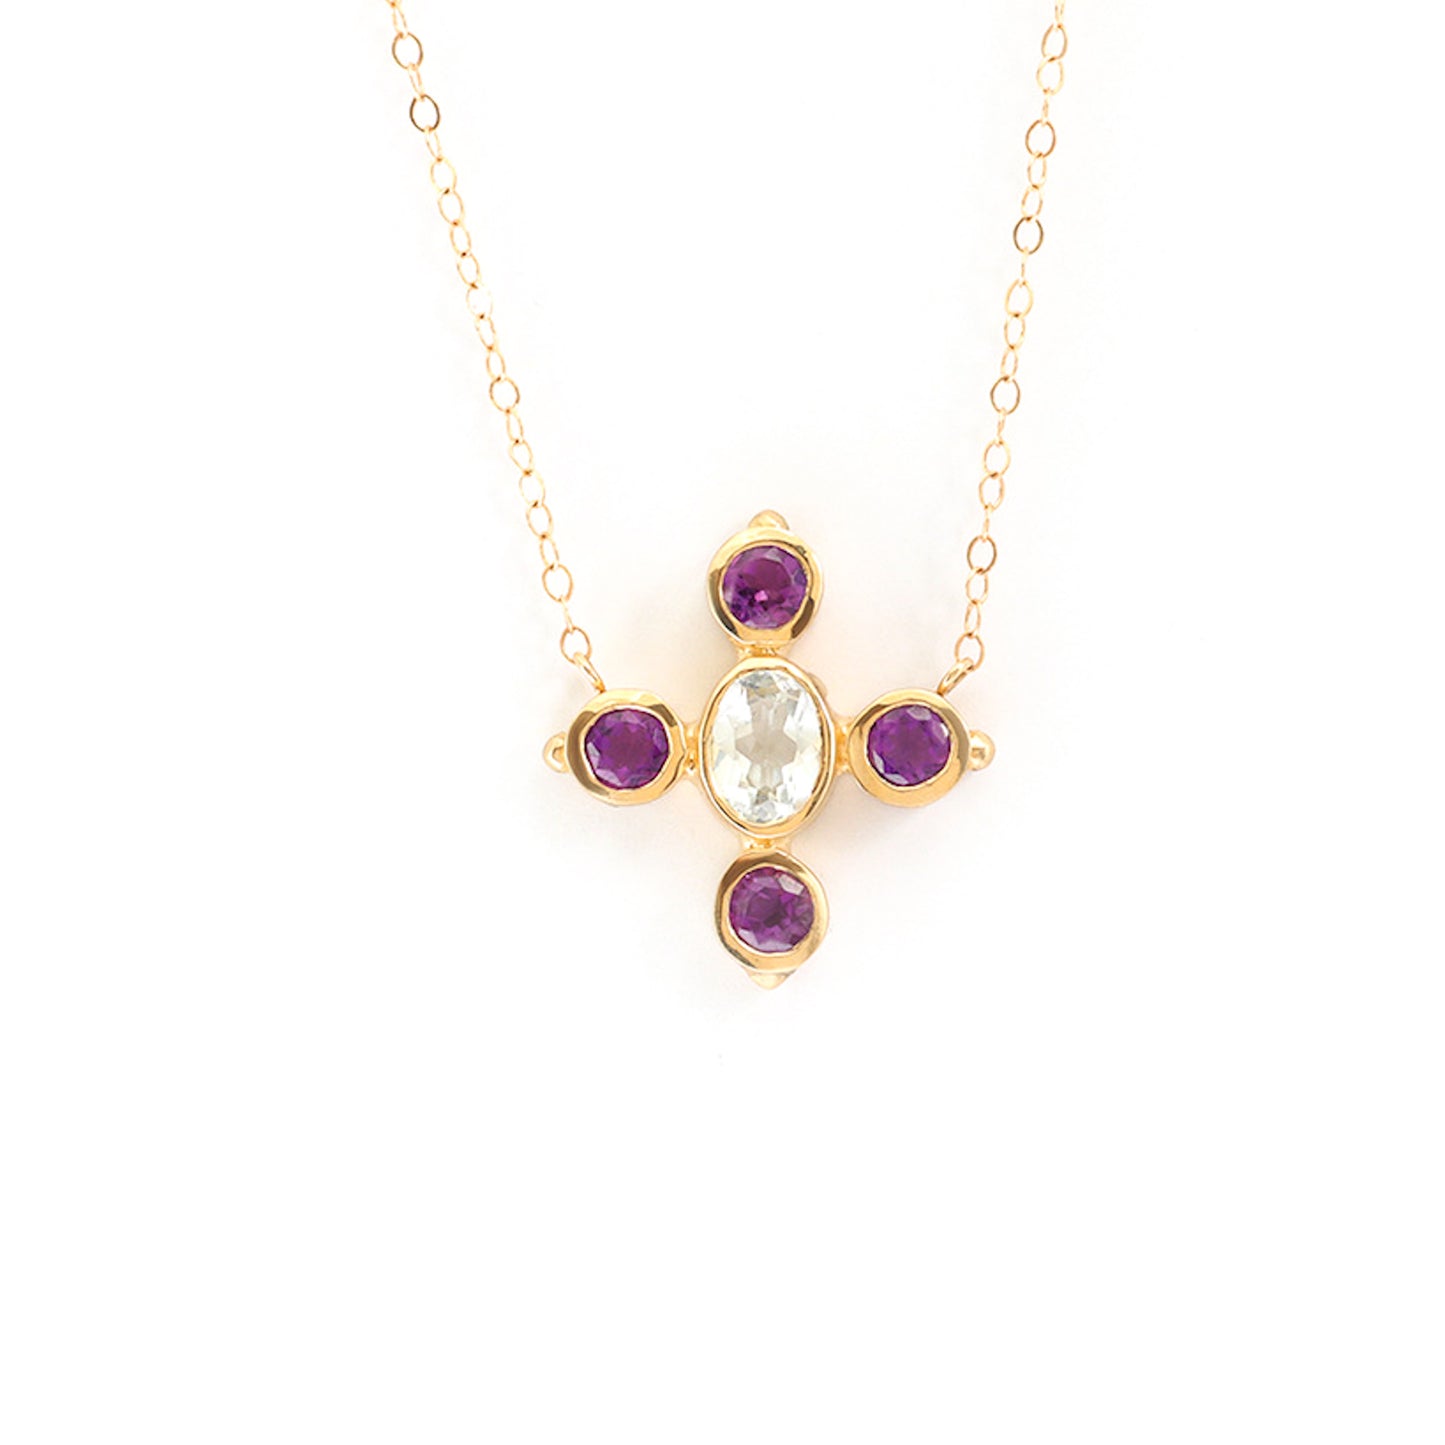 Elevate your style with this exquisite Amethyst Aquamarine necklace. Crafted with stunning gemstones and an elegant design, this necklace is the perfect accessory to add a touch of sophistication to any outfit.     14k yellow gold, white gold or rose gold 1 X 6mm aquamarine oval gemstone 4 X 4mm amethyst round gemstone 18-inch round chain with a 16-inch spacer